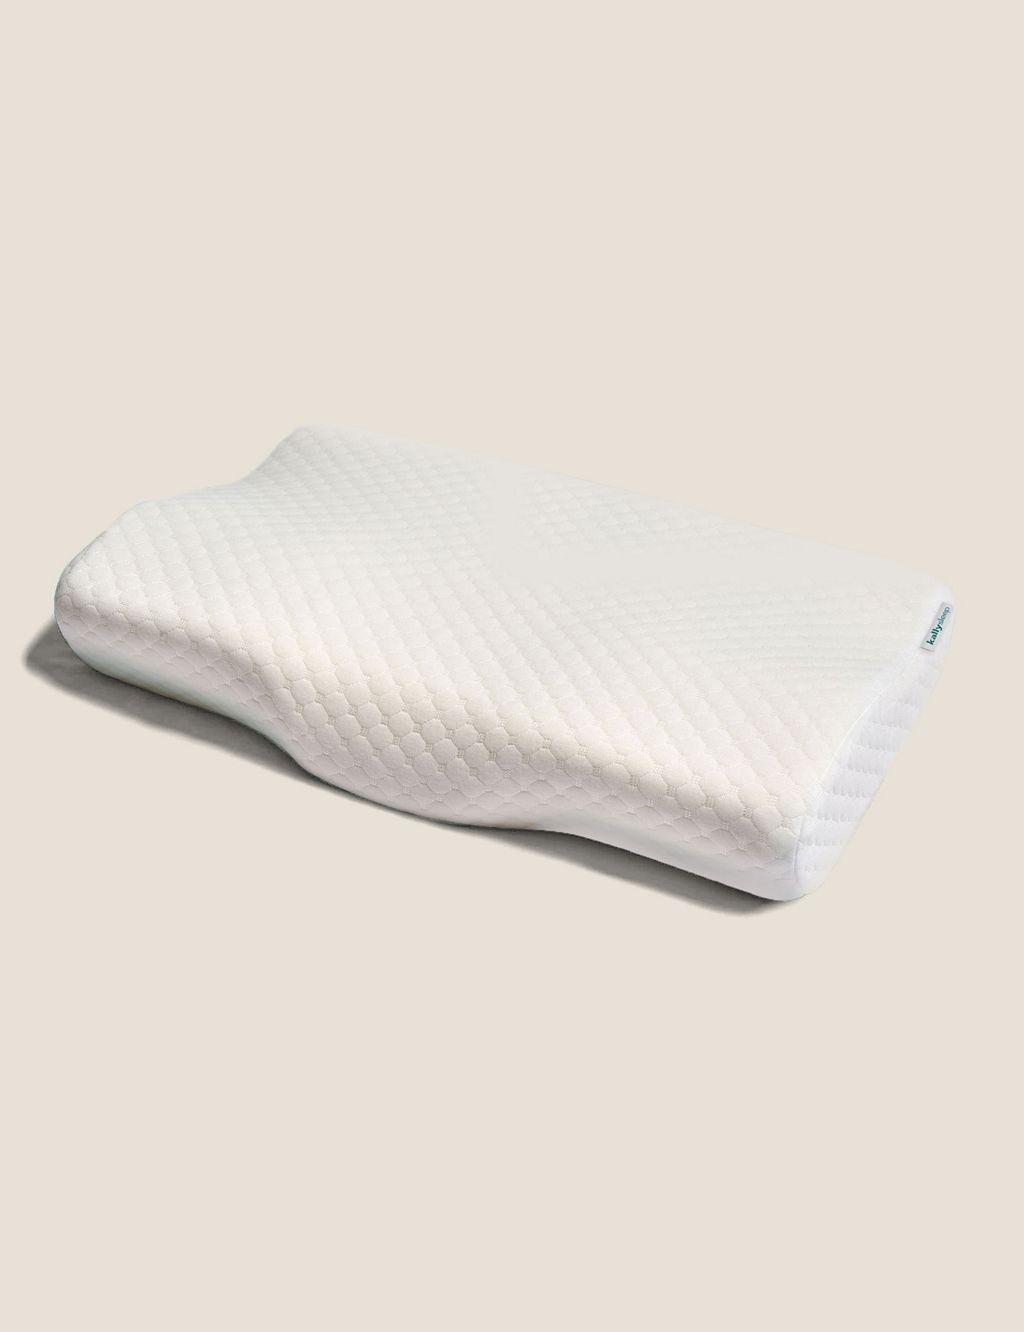 Neck Pain Firm PIllow 7 of 11